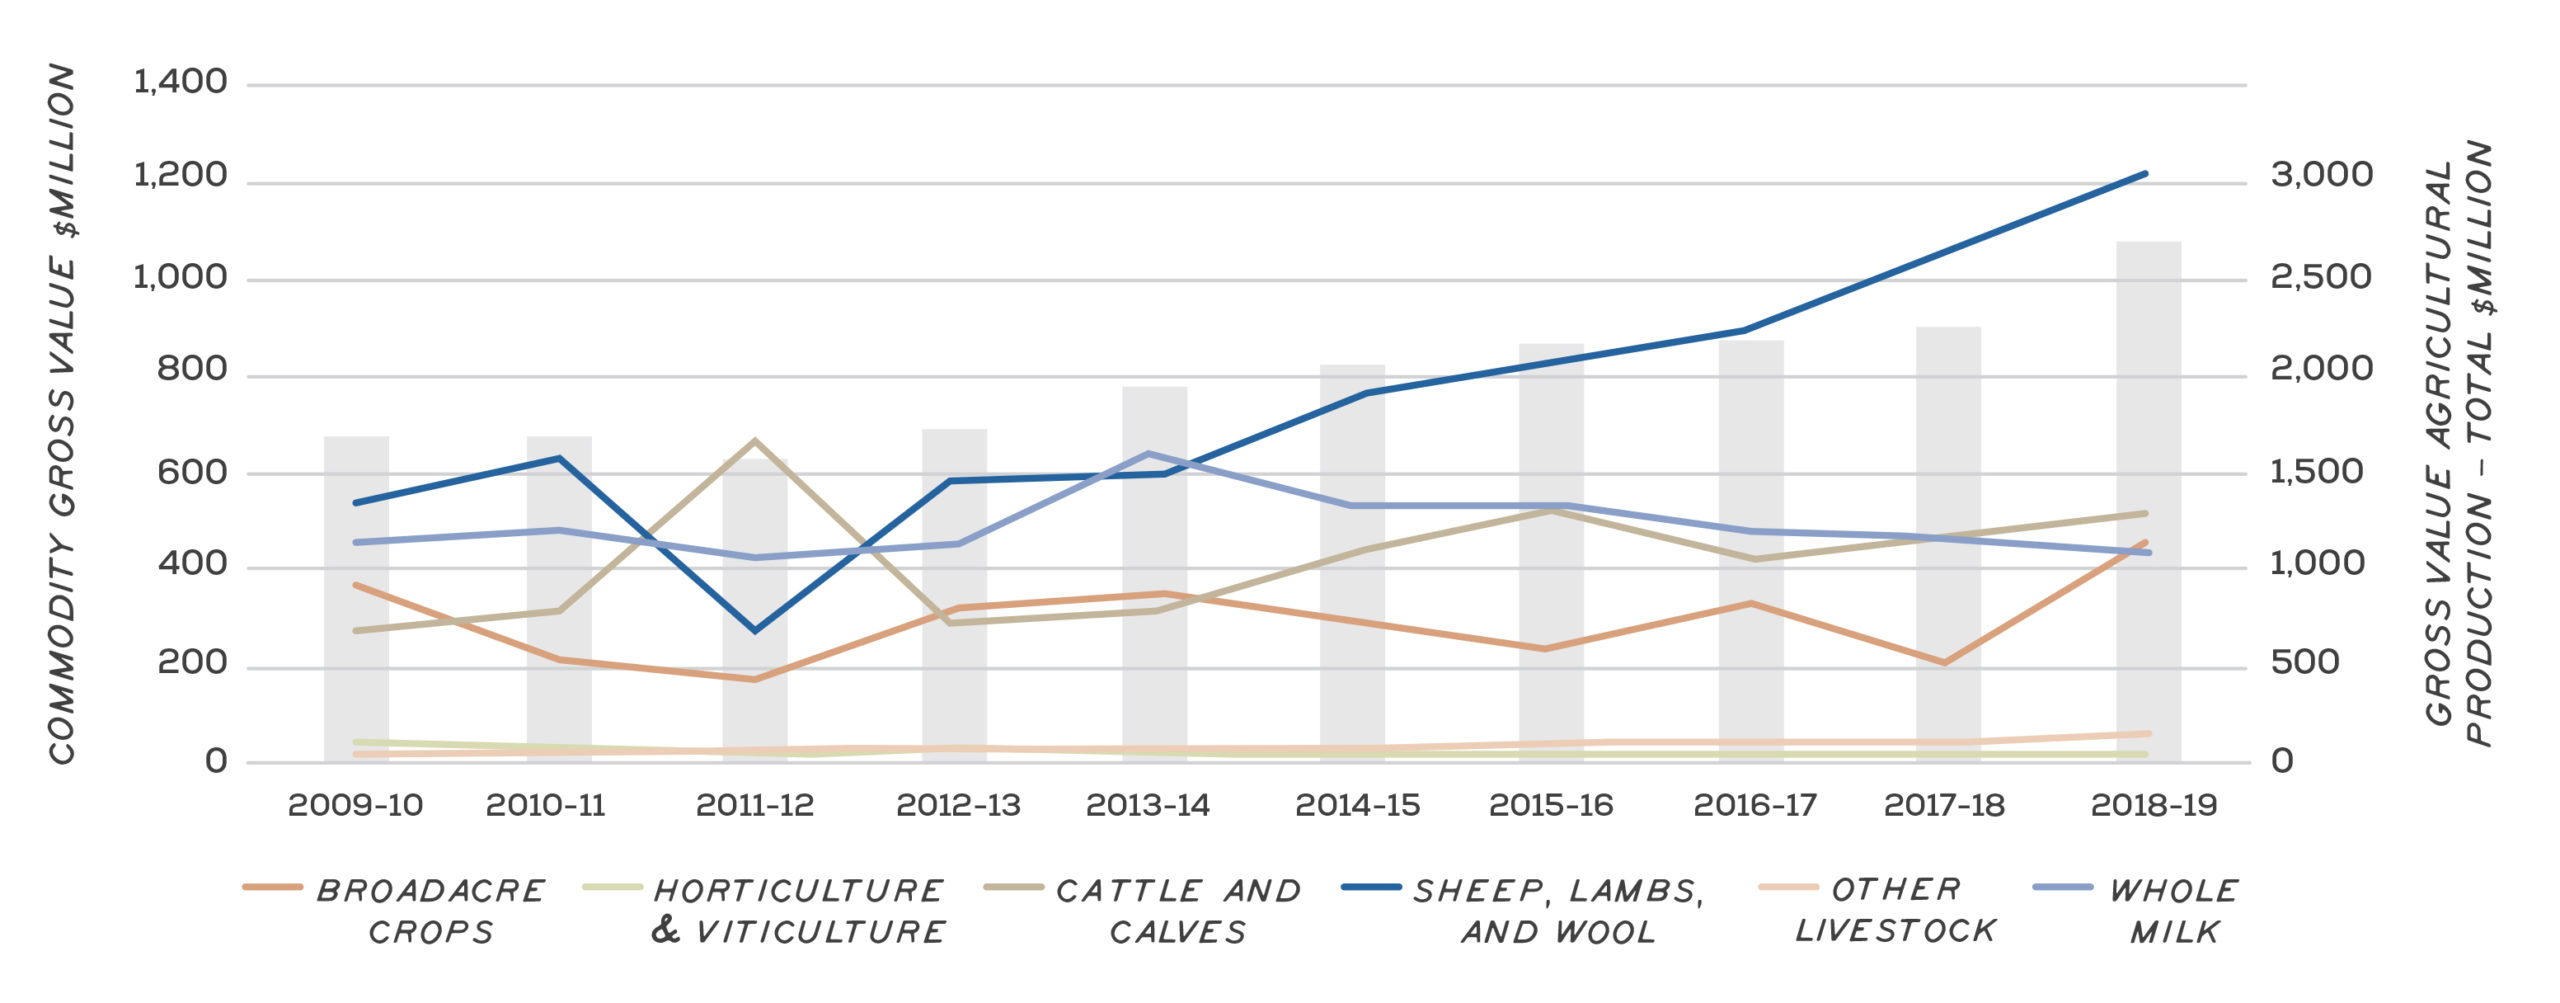 Value of agricultural commodities from 2009 to 2019